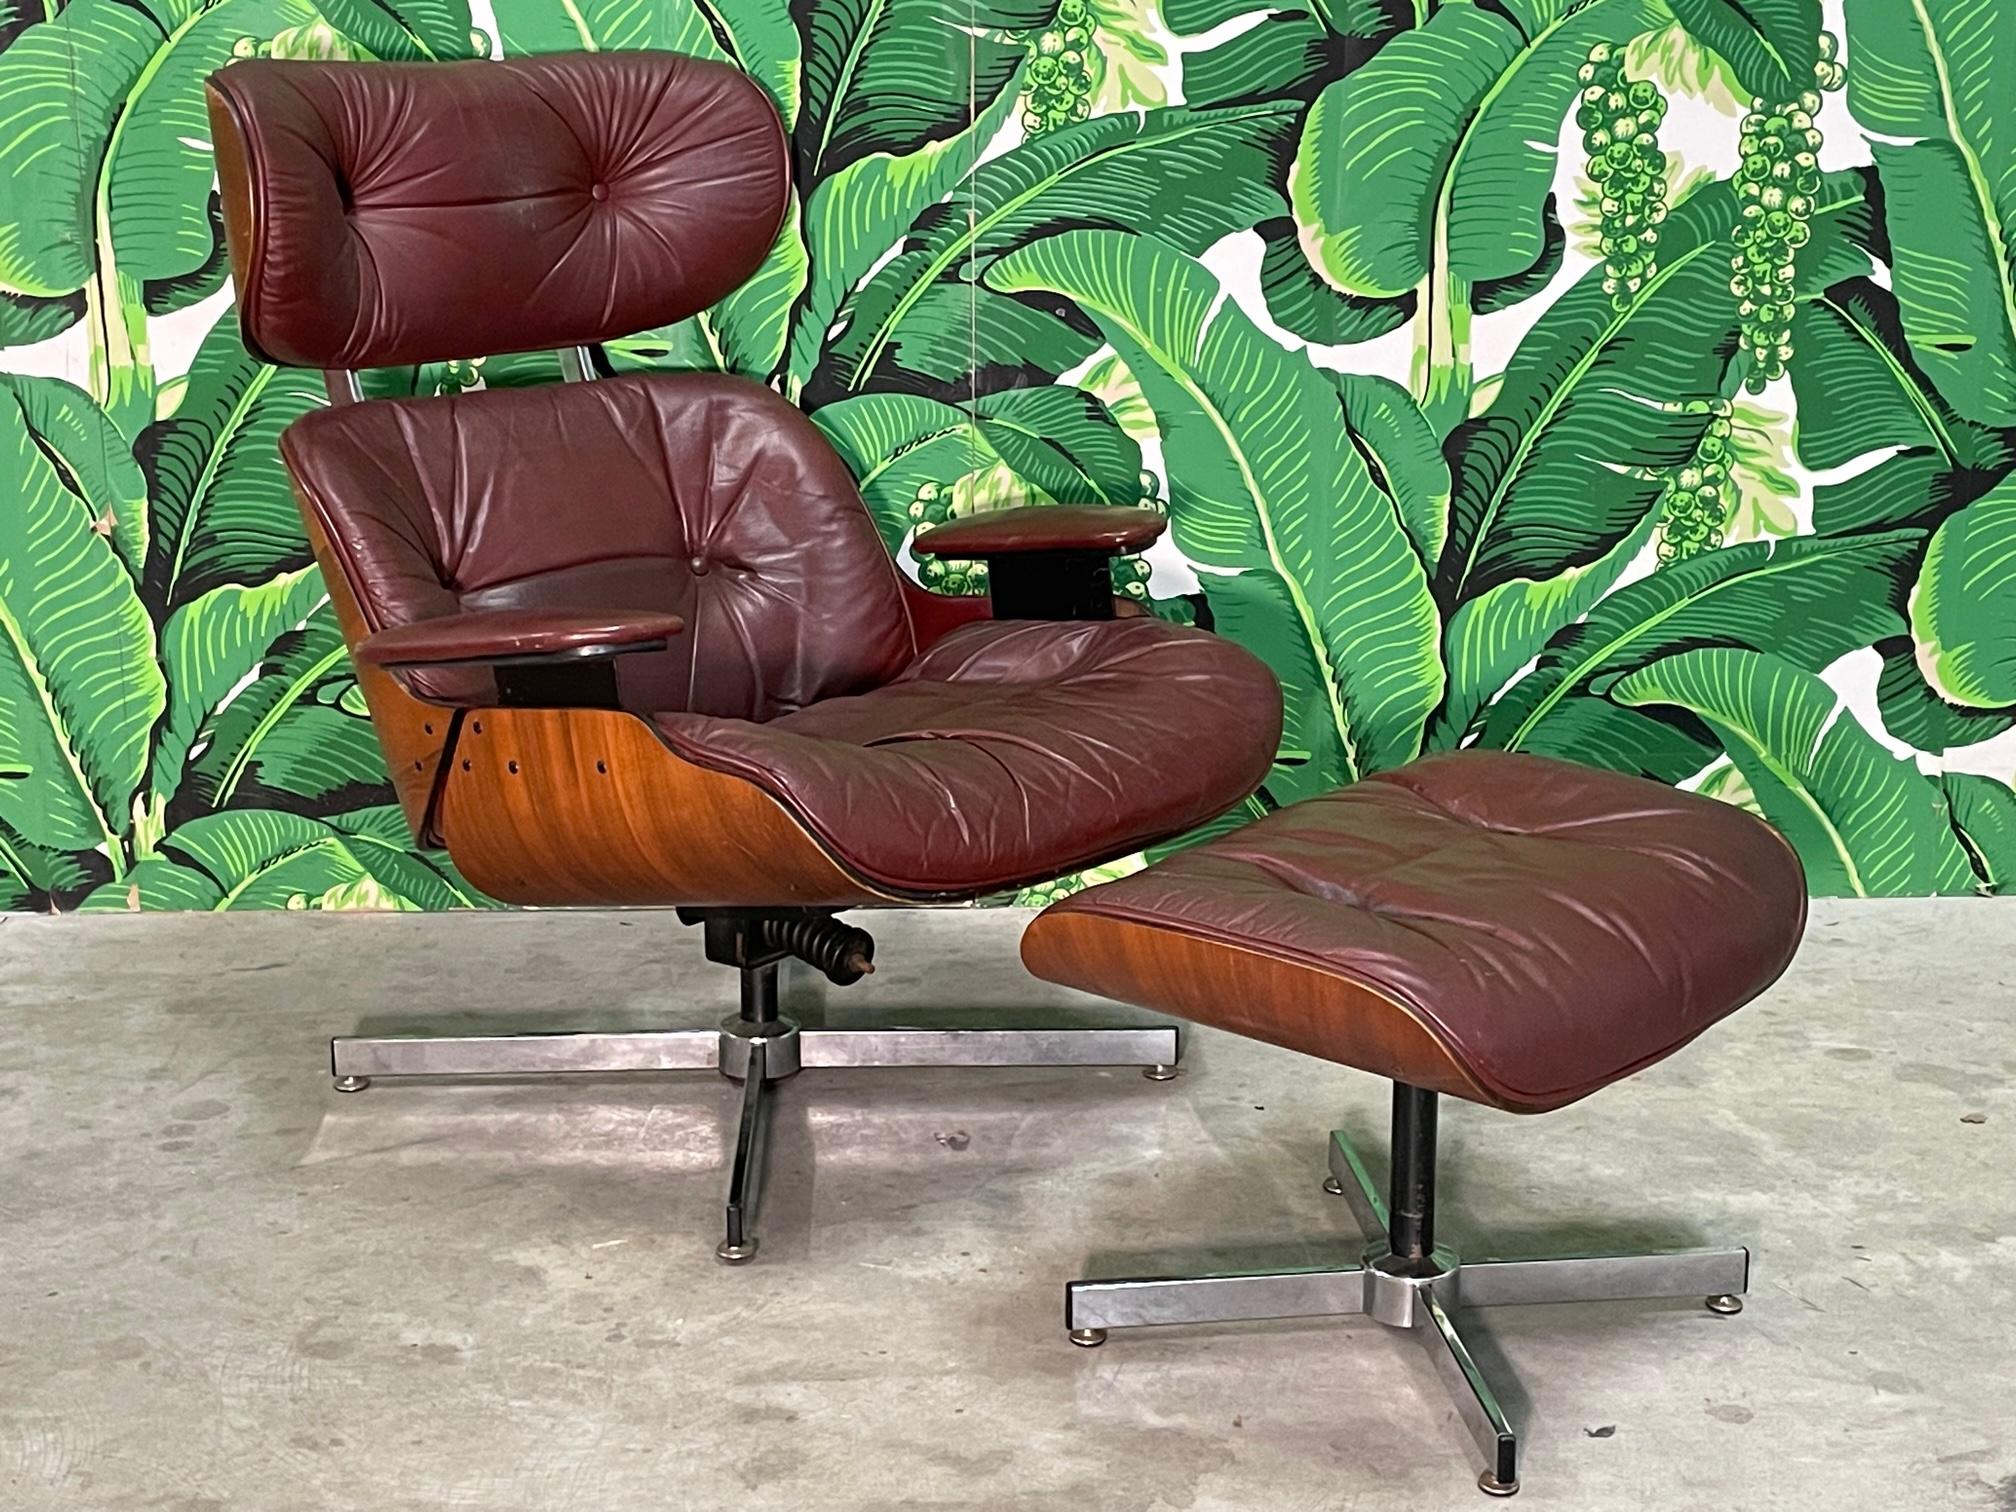 Mid century lounge chair and ottoman feature the iconic Eames style with leather upholstery and signature curved wood frame. Good condition with imperfections consistent with age and use, namely there are two buttons missing on ottoman and one